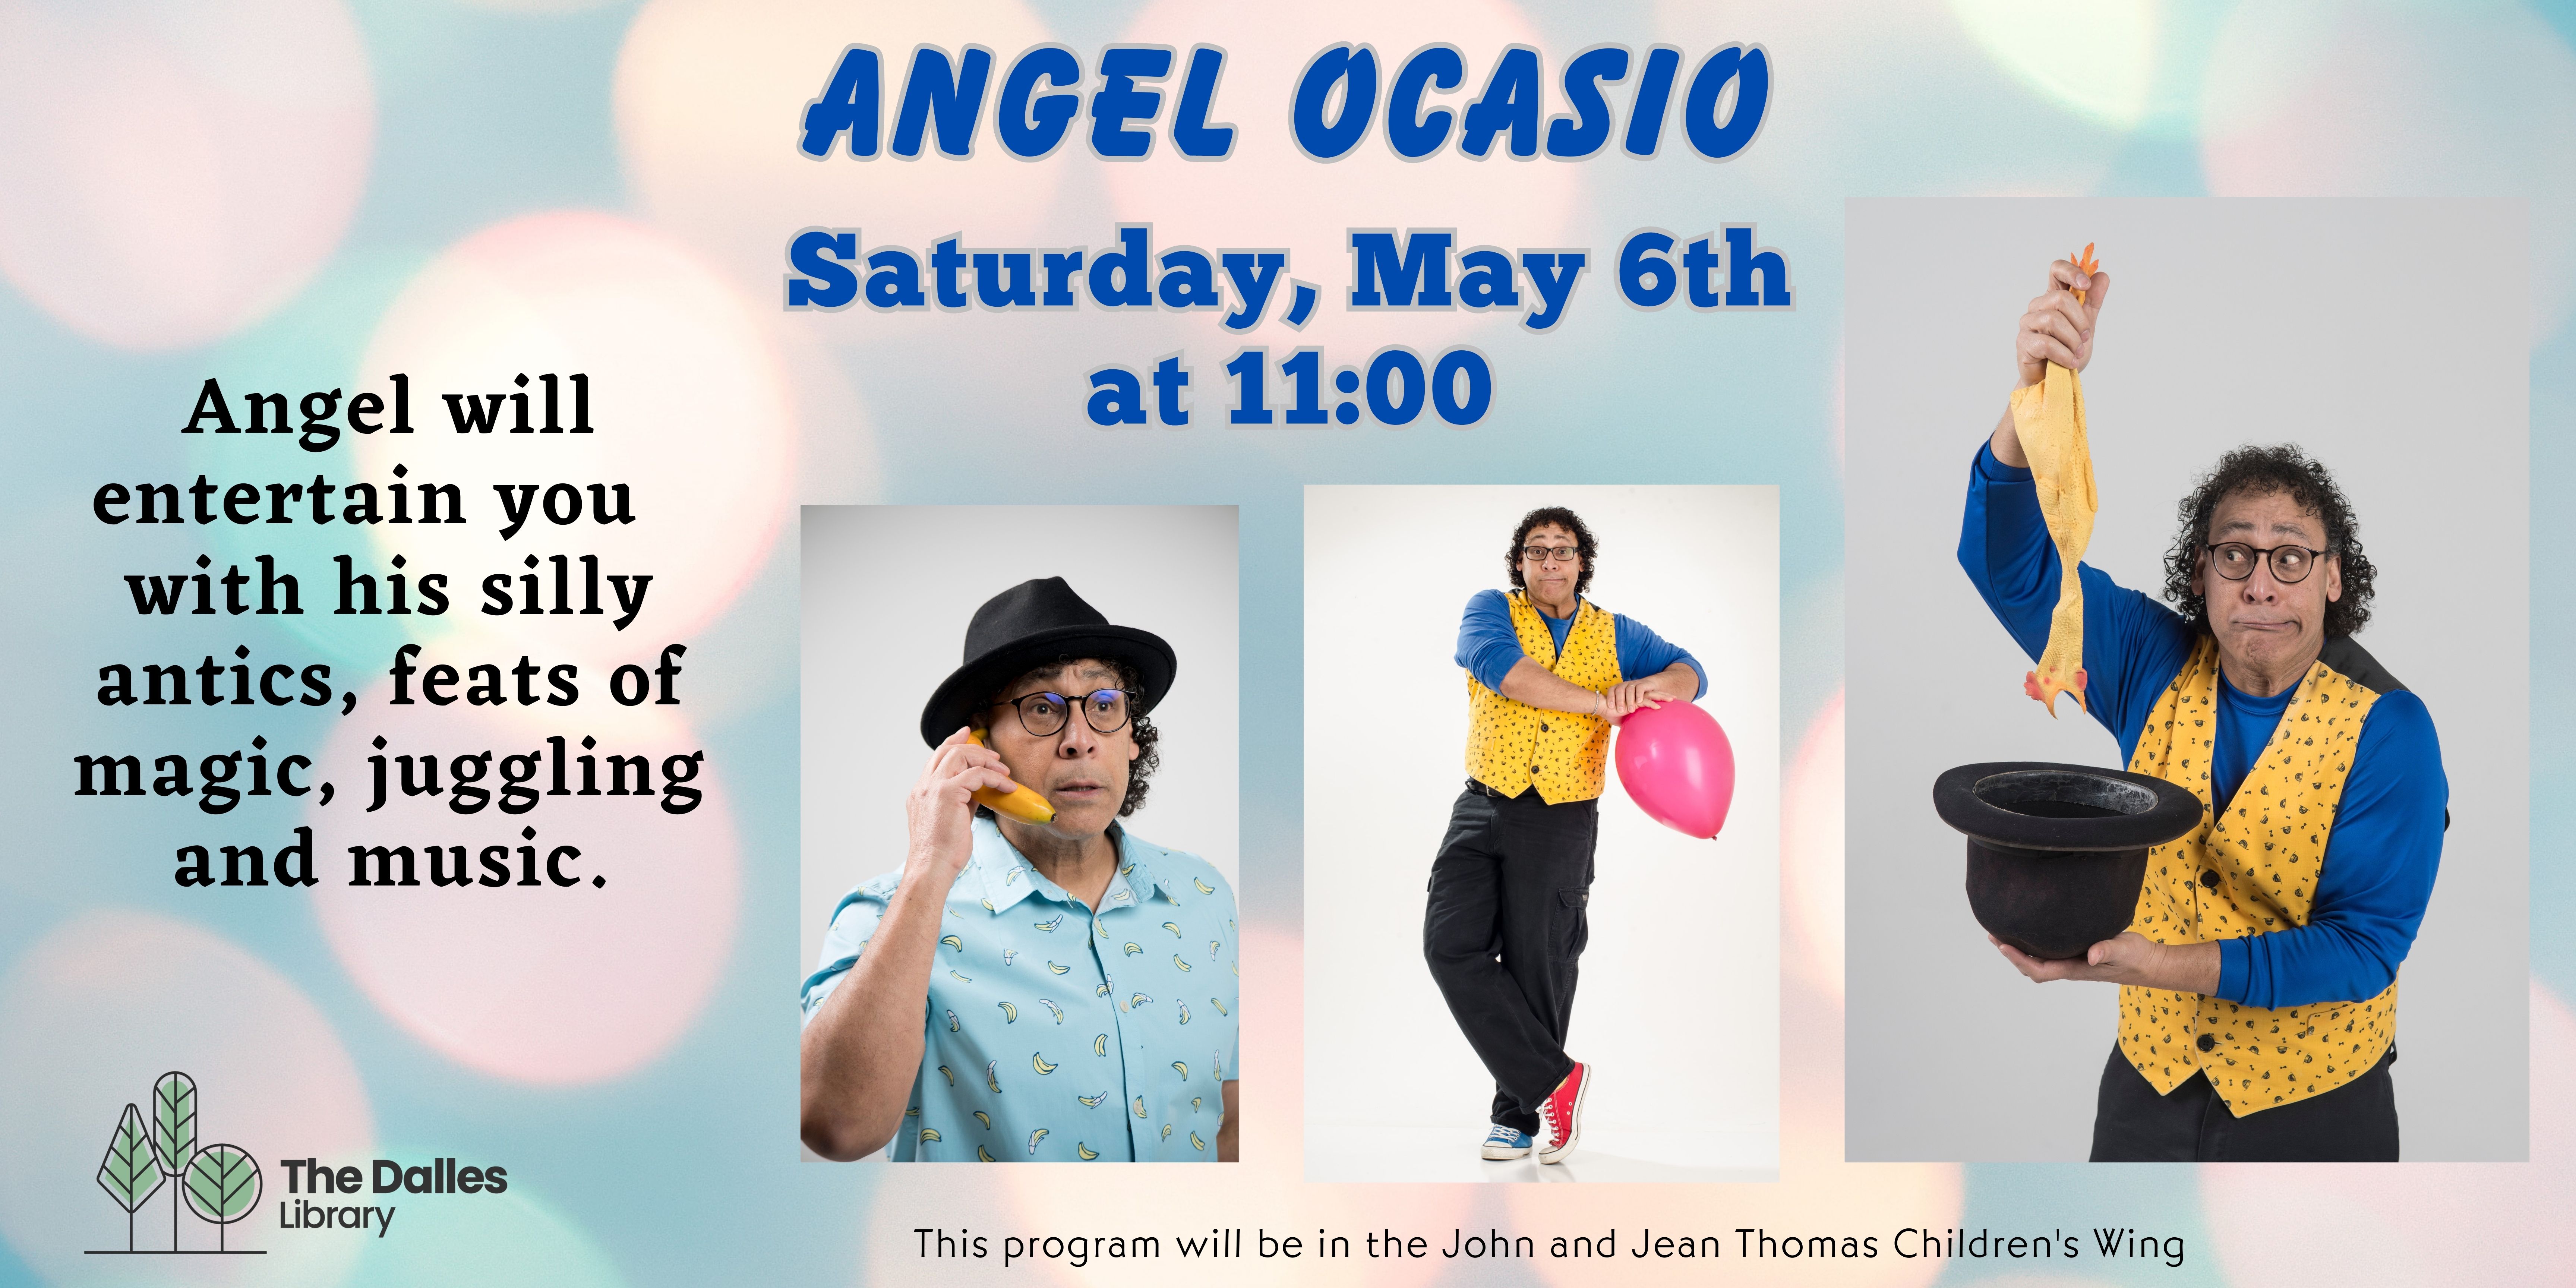 Pictures of Angel Ocasio talking to a banana, leaning on a balloon, and pulling a rubber chicken out of hat on light background.